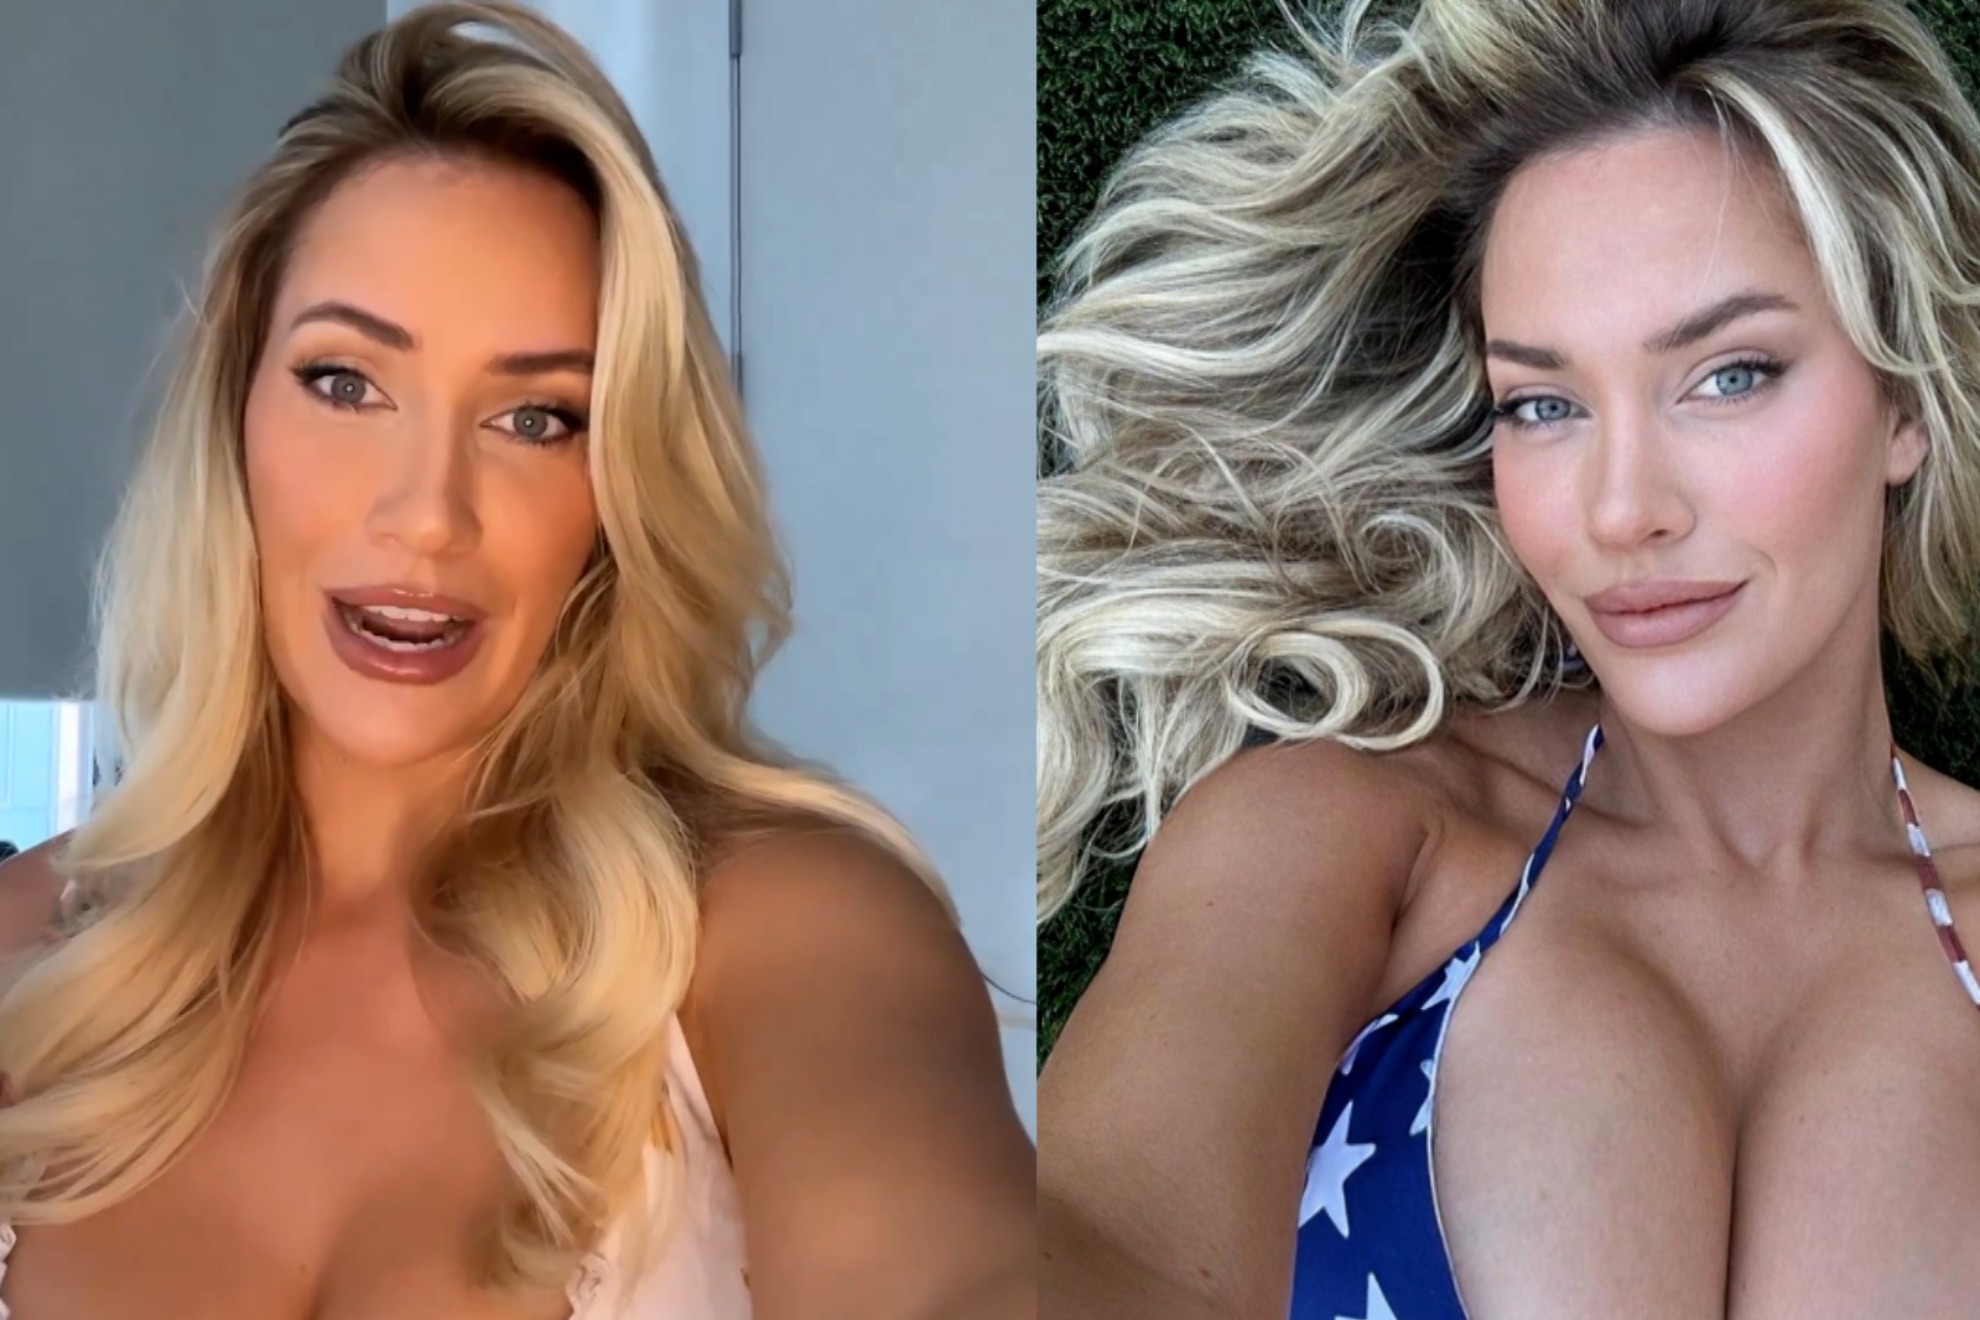 Paige Spiranac claims looking at her 34DD boobs is good for men's